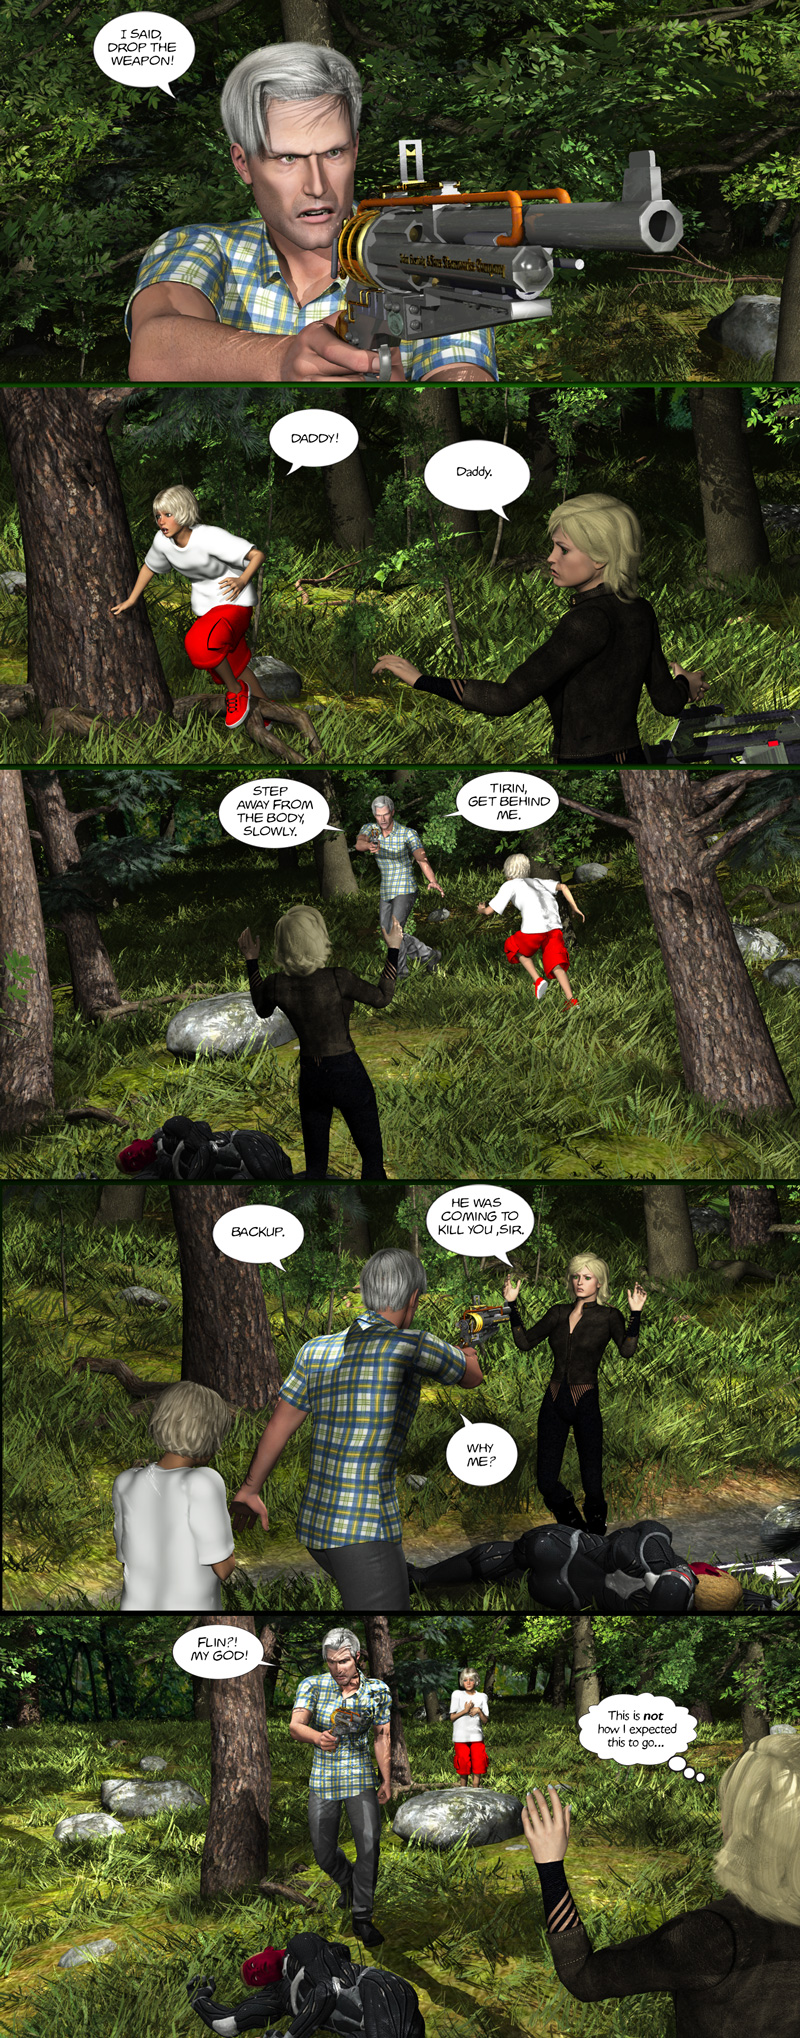 Chapter 10, page 21